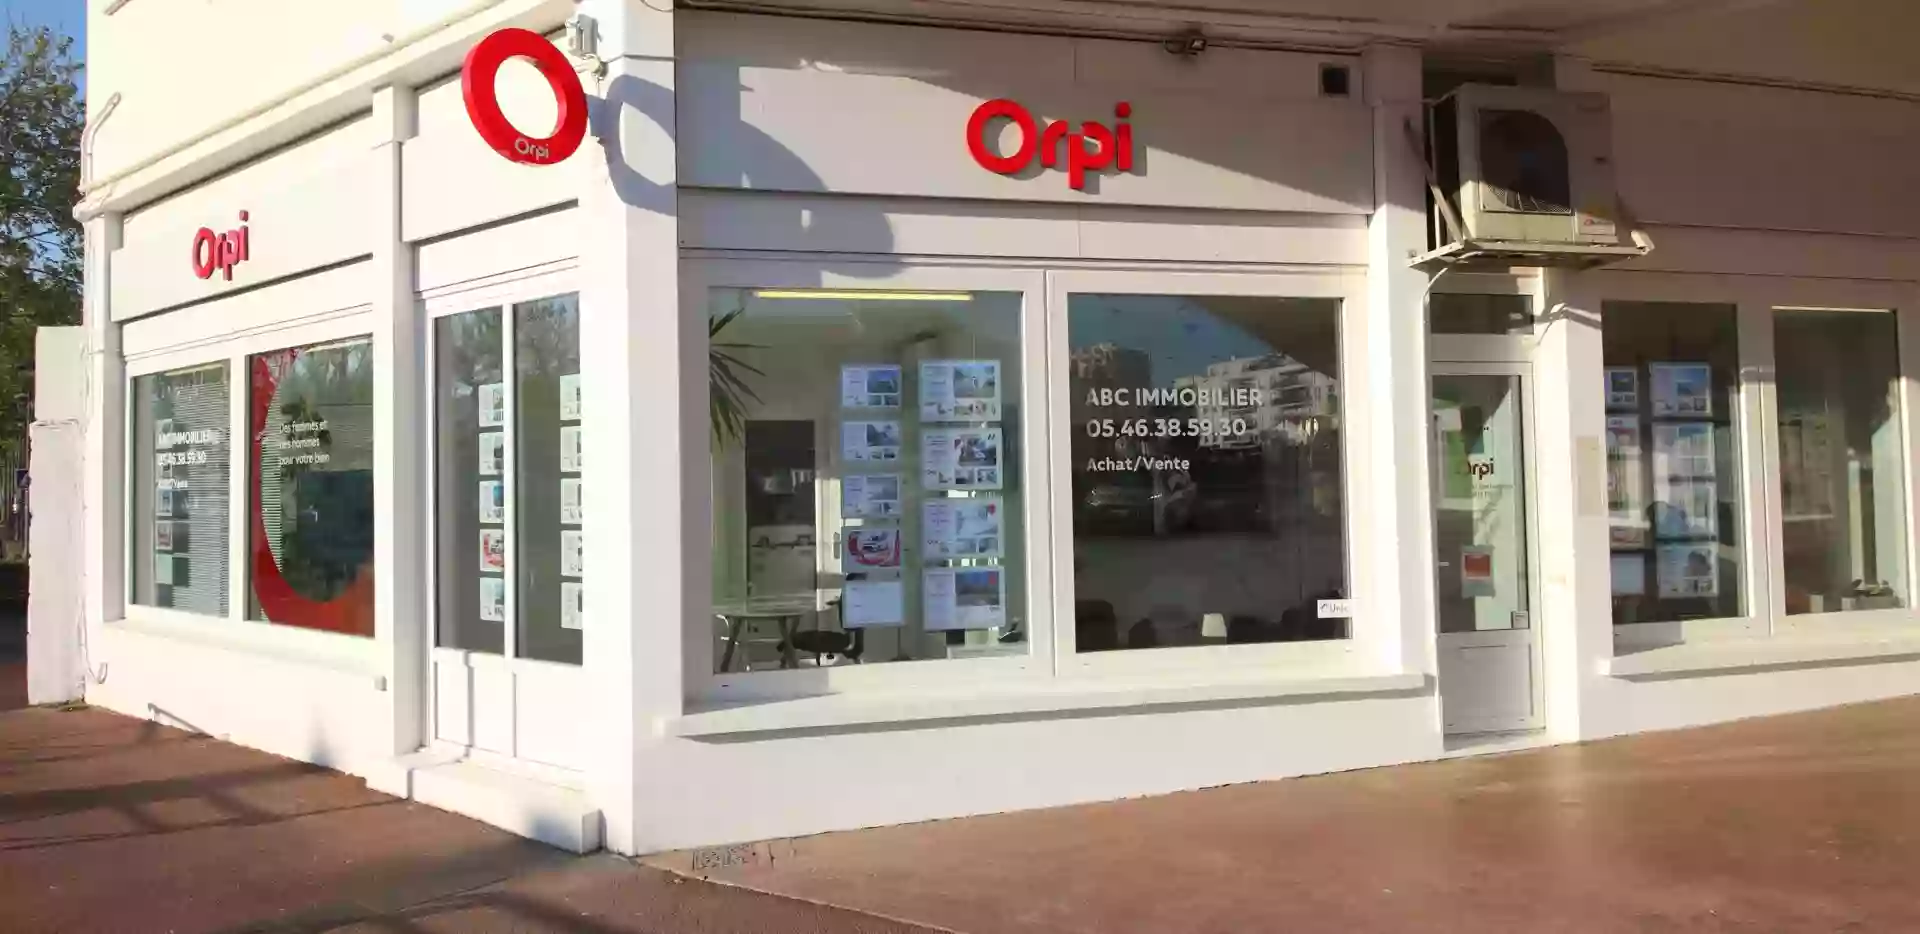 Orpi ABC Immobilier Royan